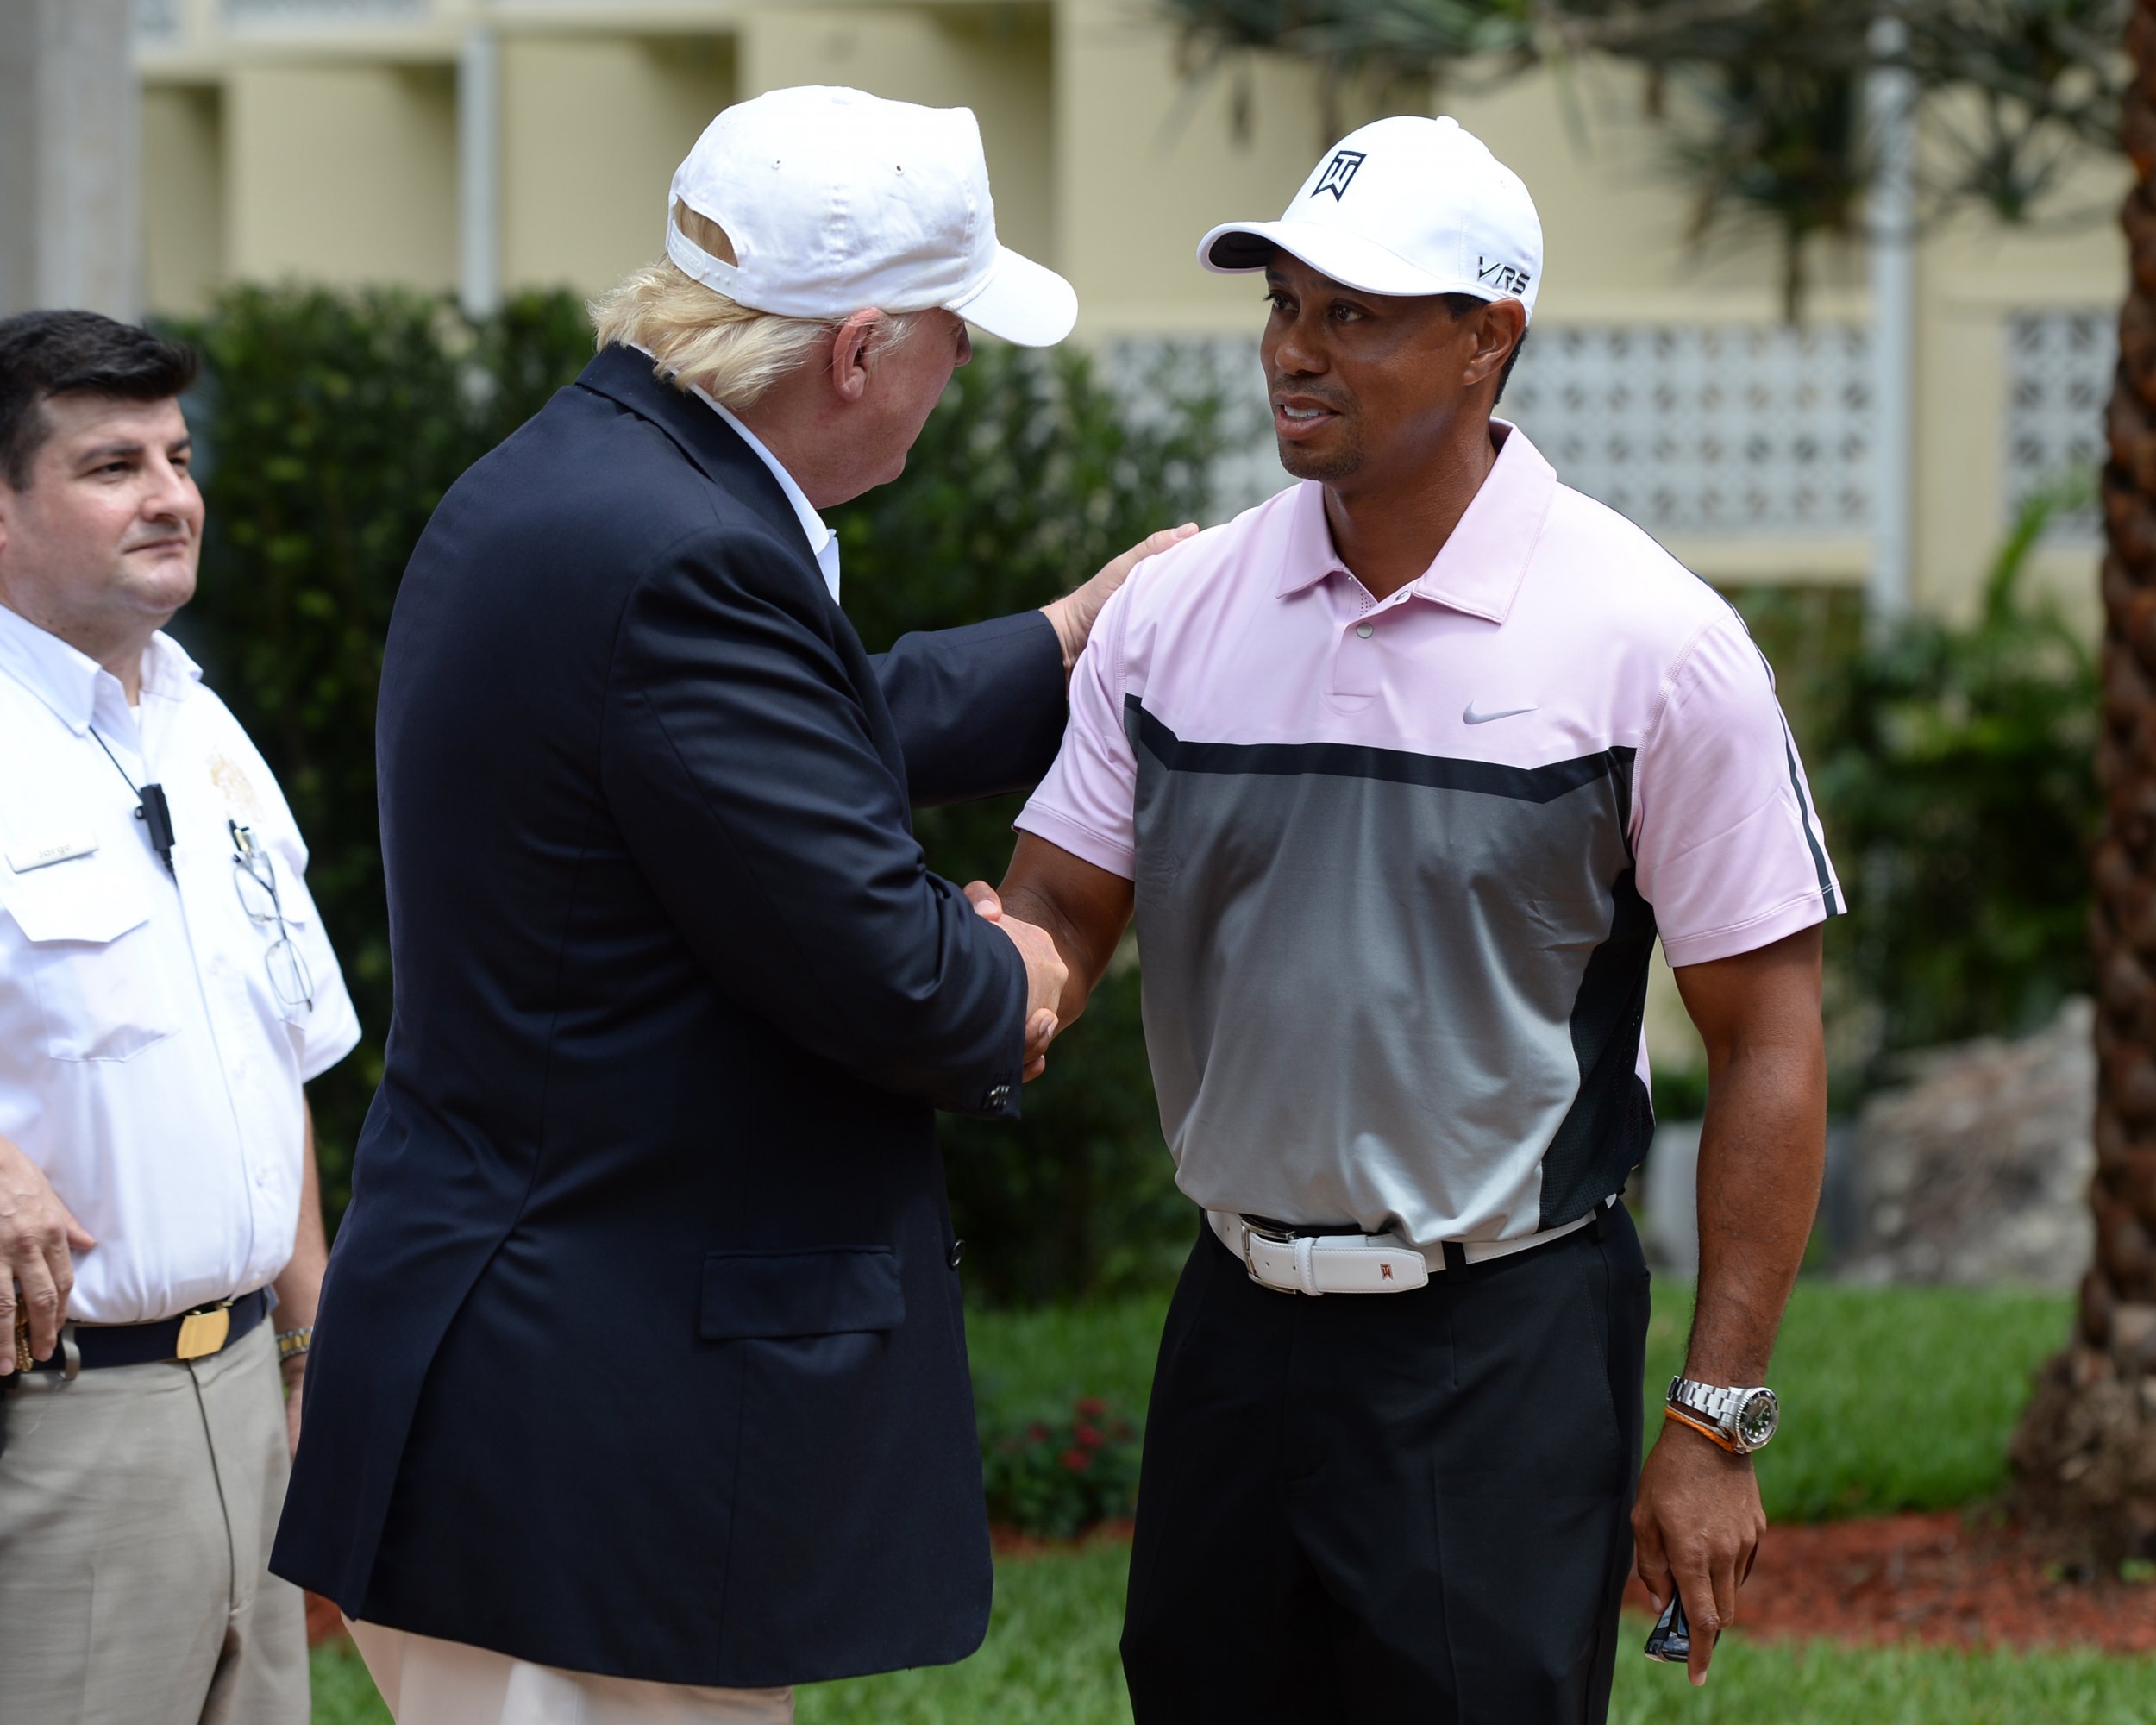 Tiger Woods Award From Donald Trump Live Stream Watch Golf Star Receive Medal of Freedom